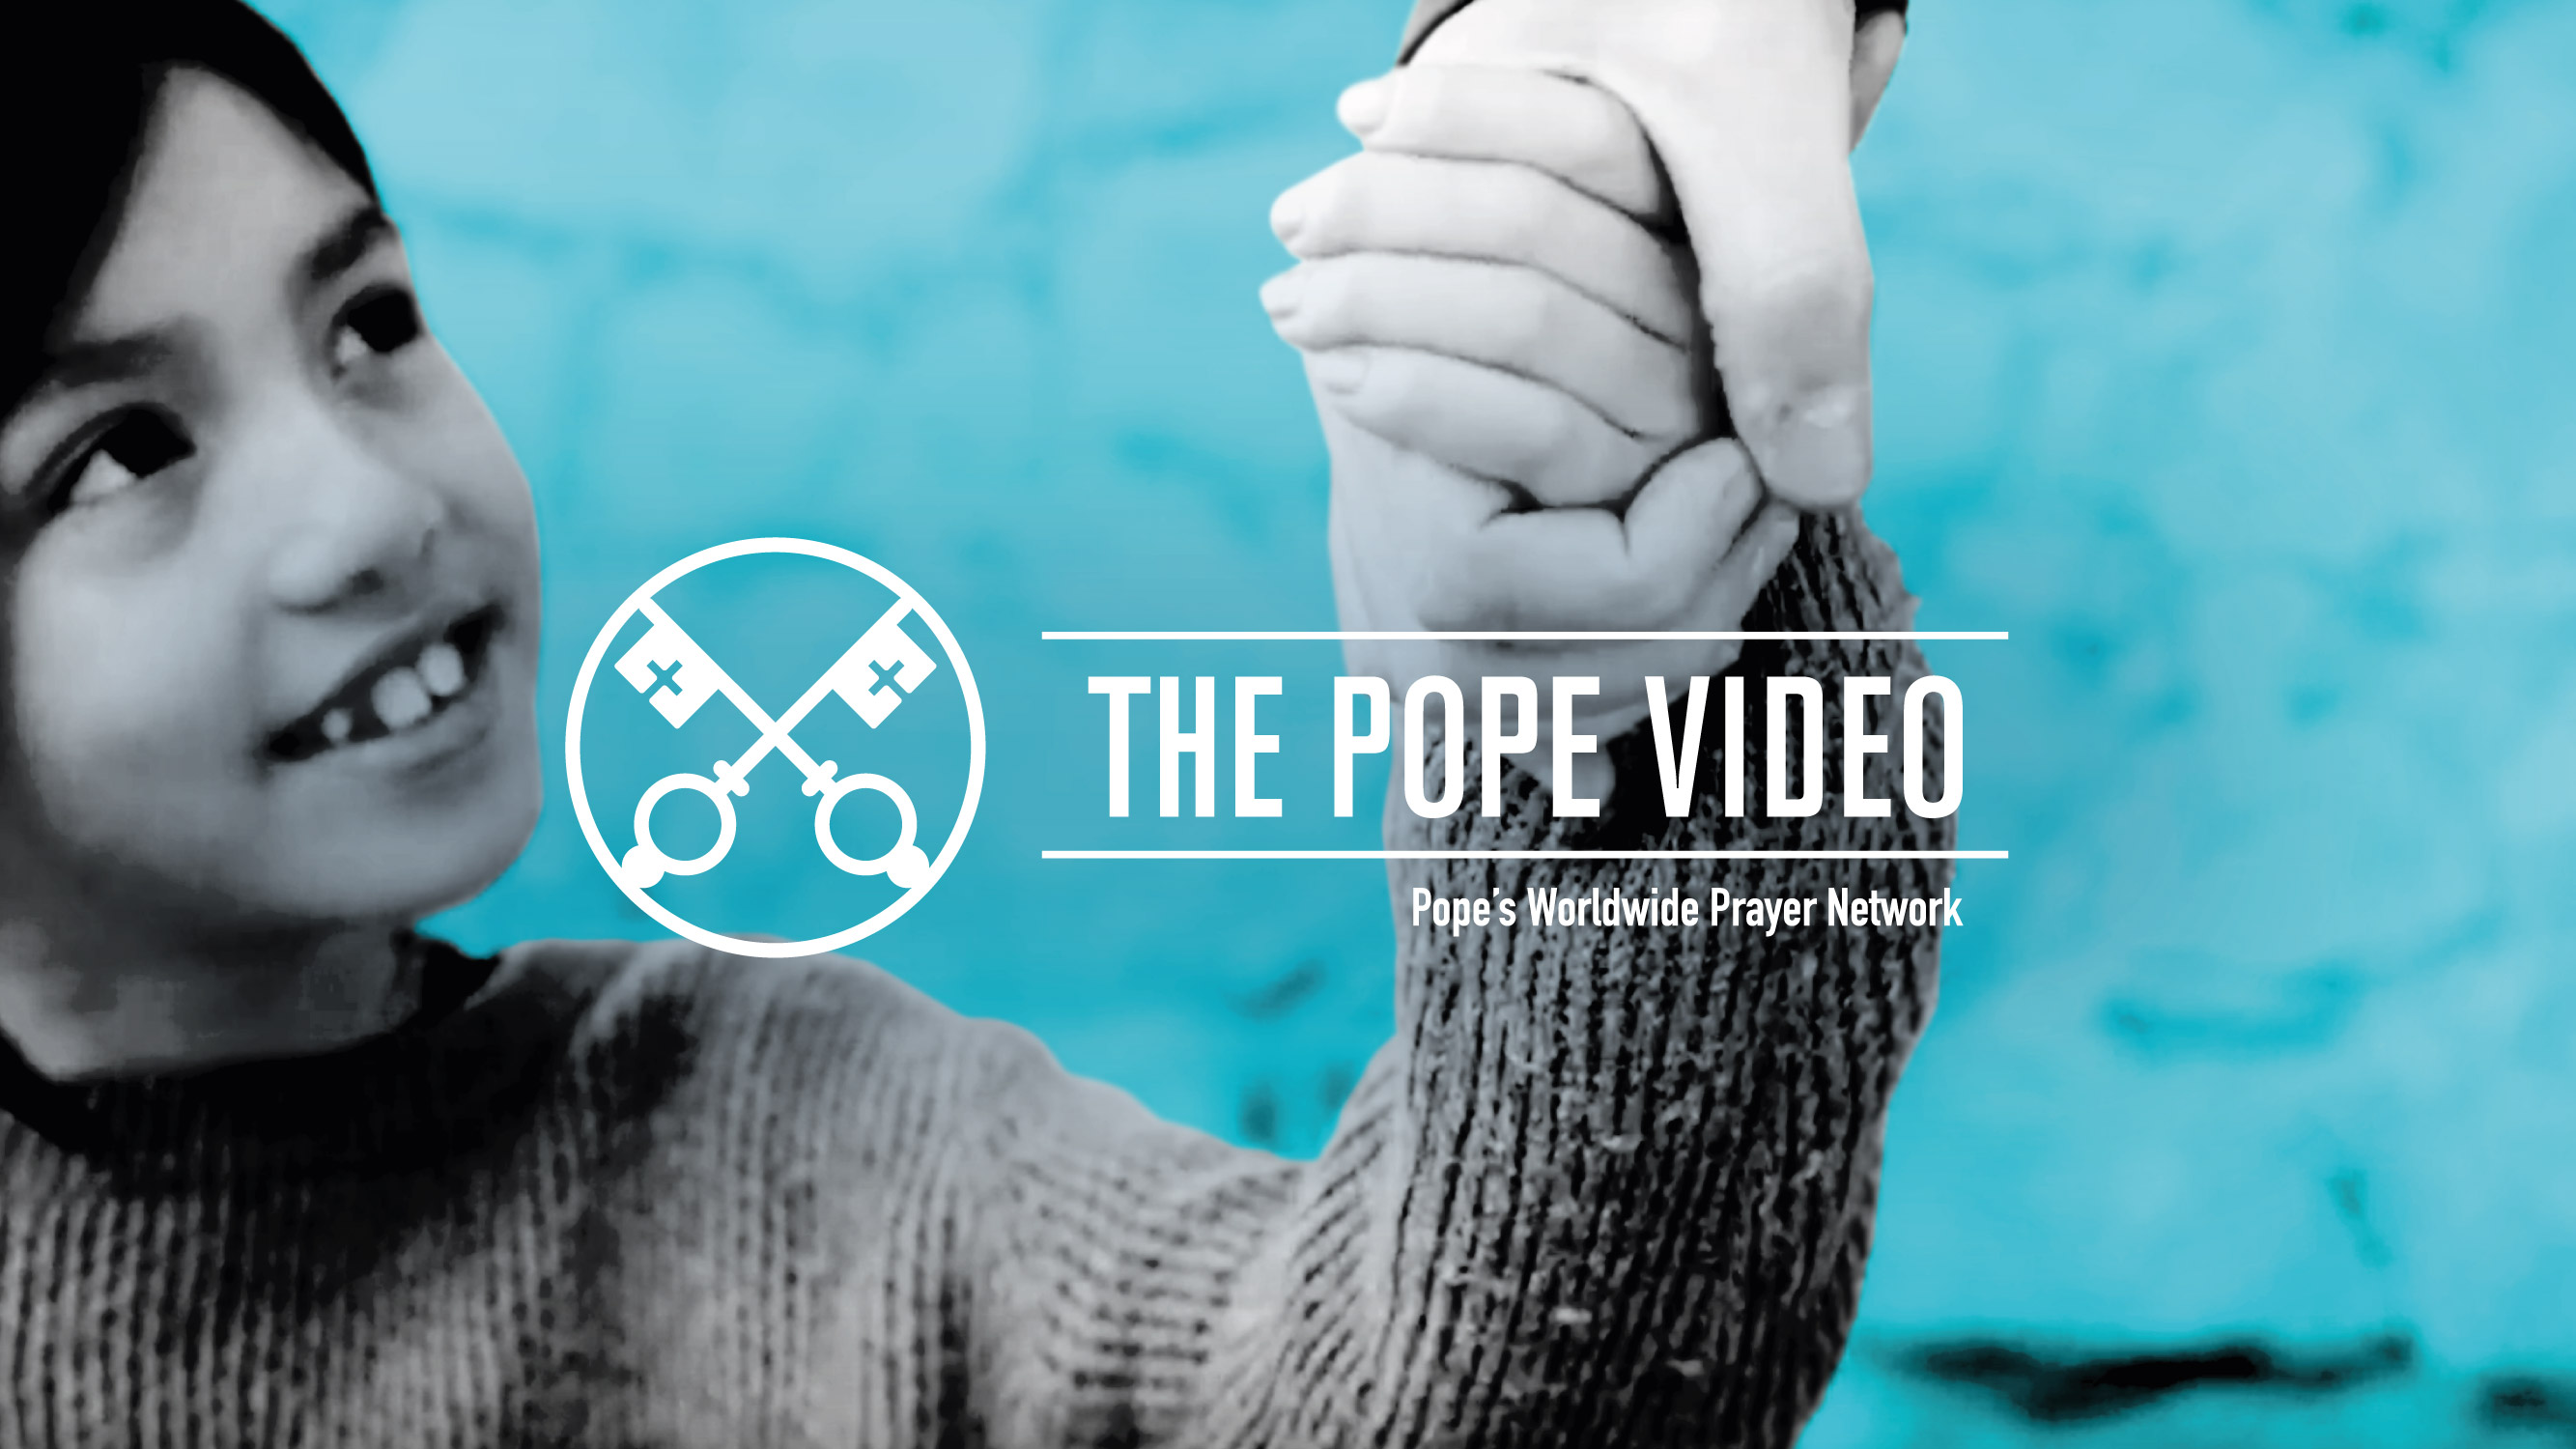 The Pope Video December 2019 (Official Image)